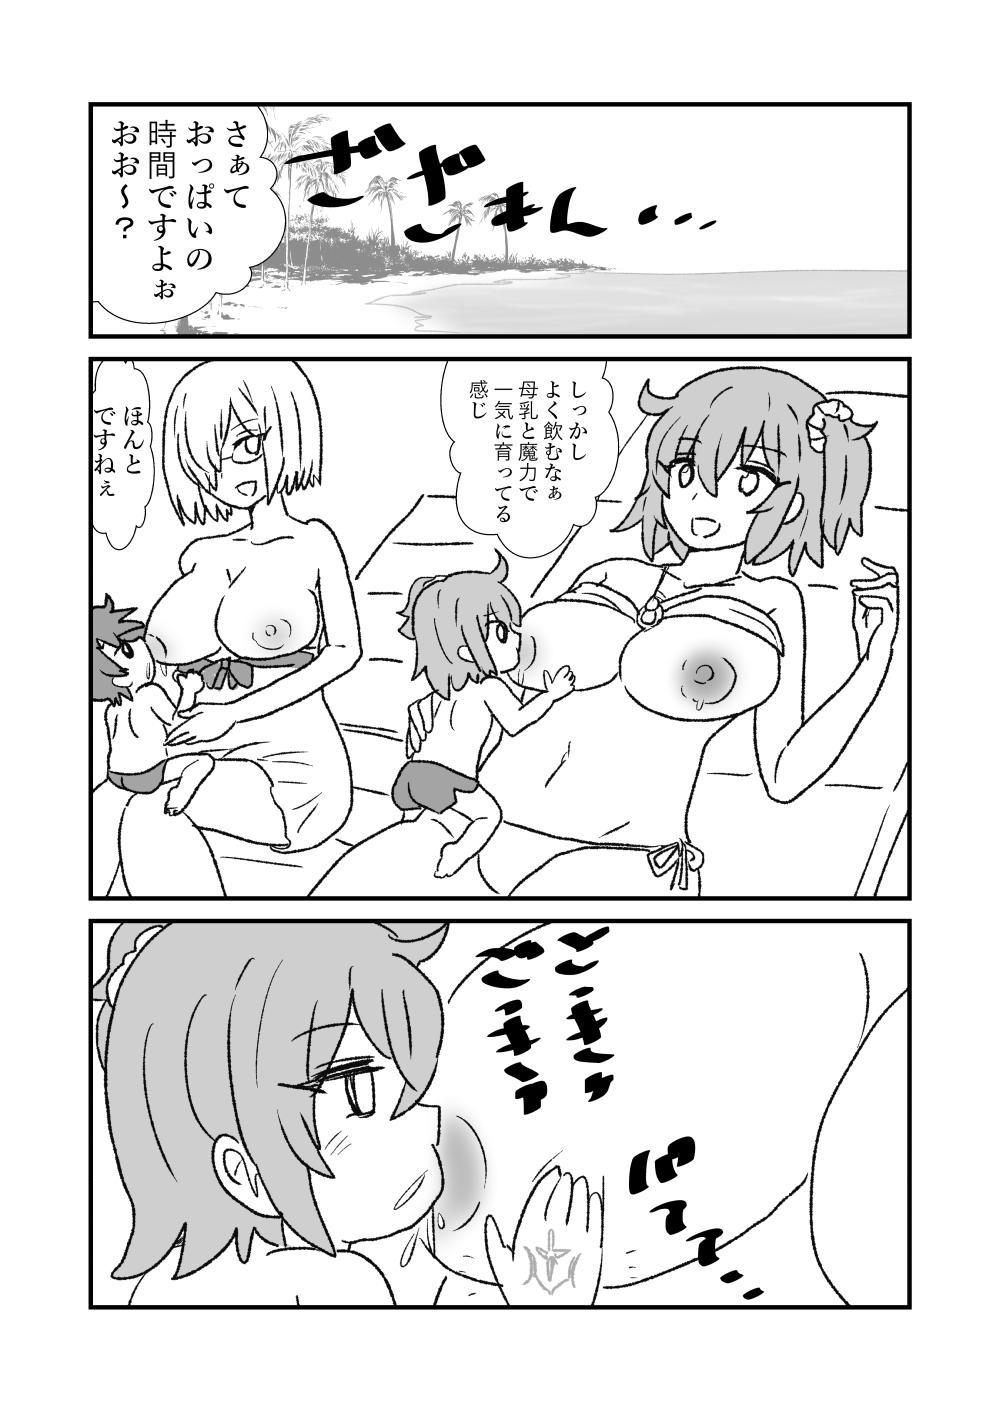 Thylinh FPO~桃色林檎の種付け周回～ - Fate grand order Unshaved - Page 65